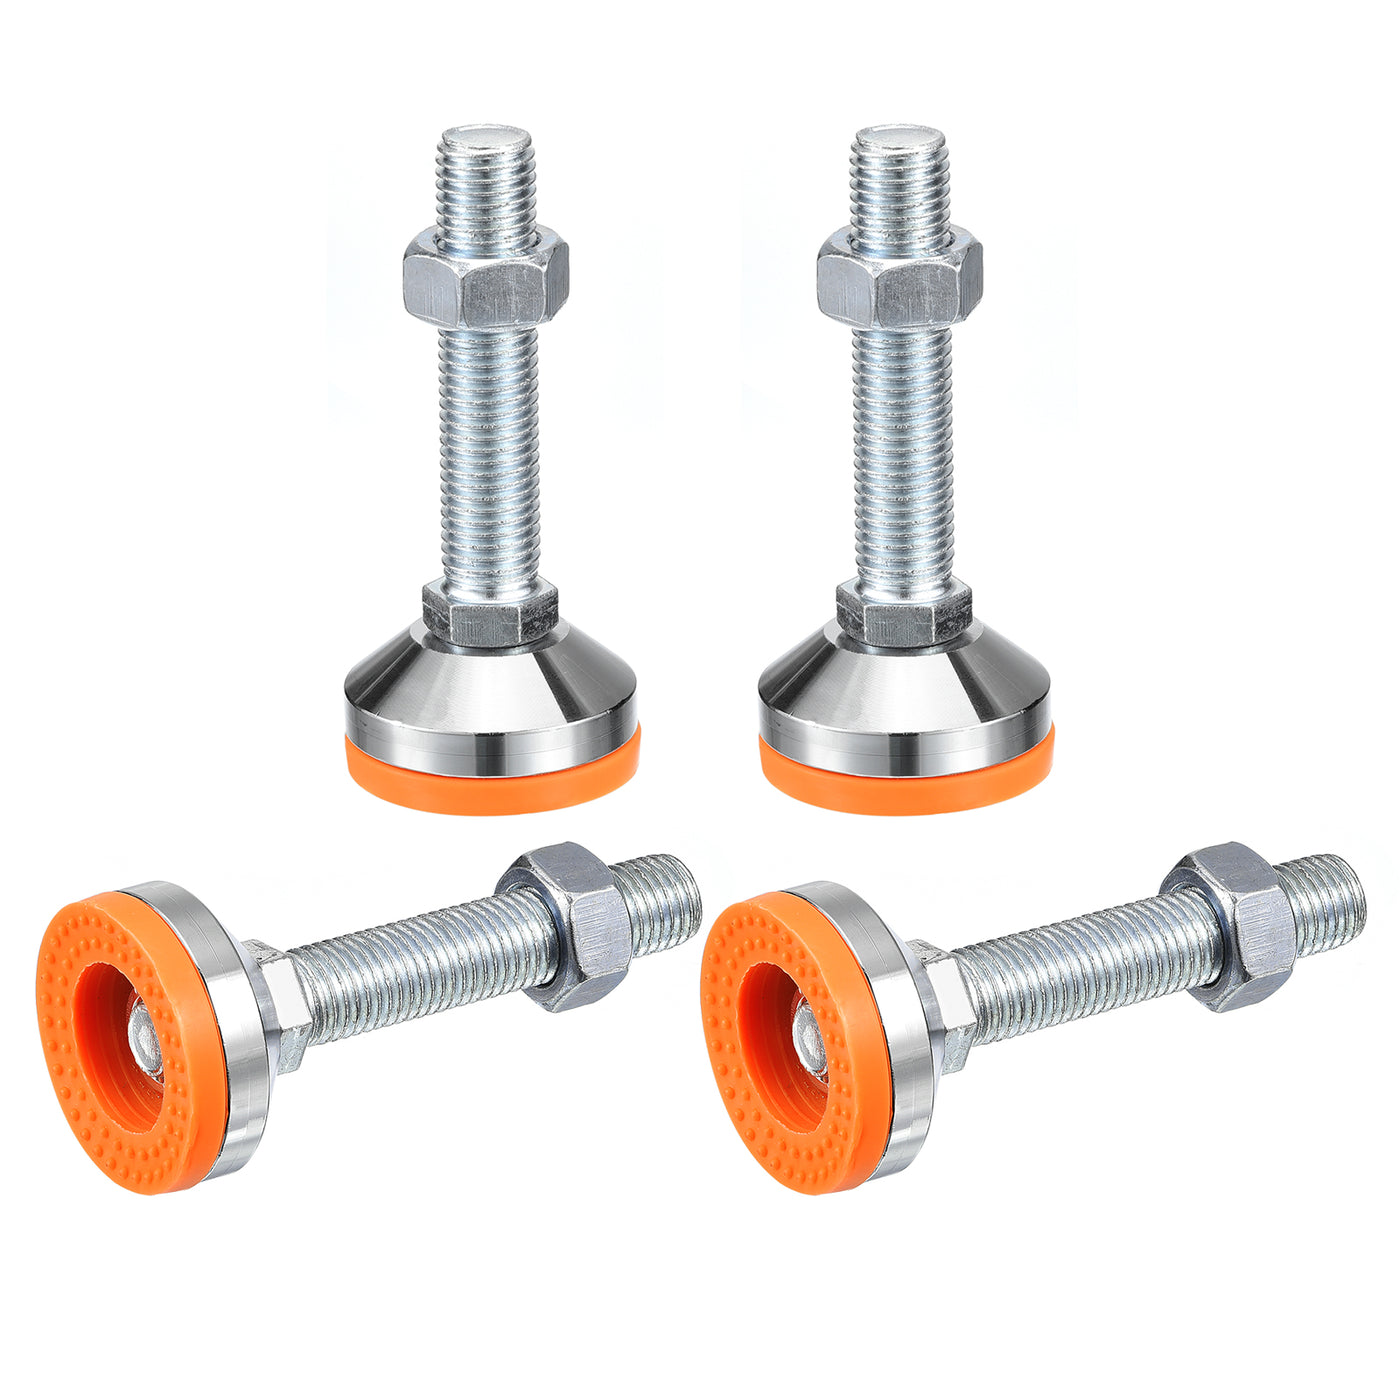 uxcell Uxcell Leveling Feet, 4Pcs M20x100x60mm - Carbon Steel Non-Skid Anti-shock Adjustable Table Feet, Leveling Screw Leg for Furniture Workshops Equipment